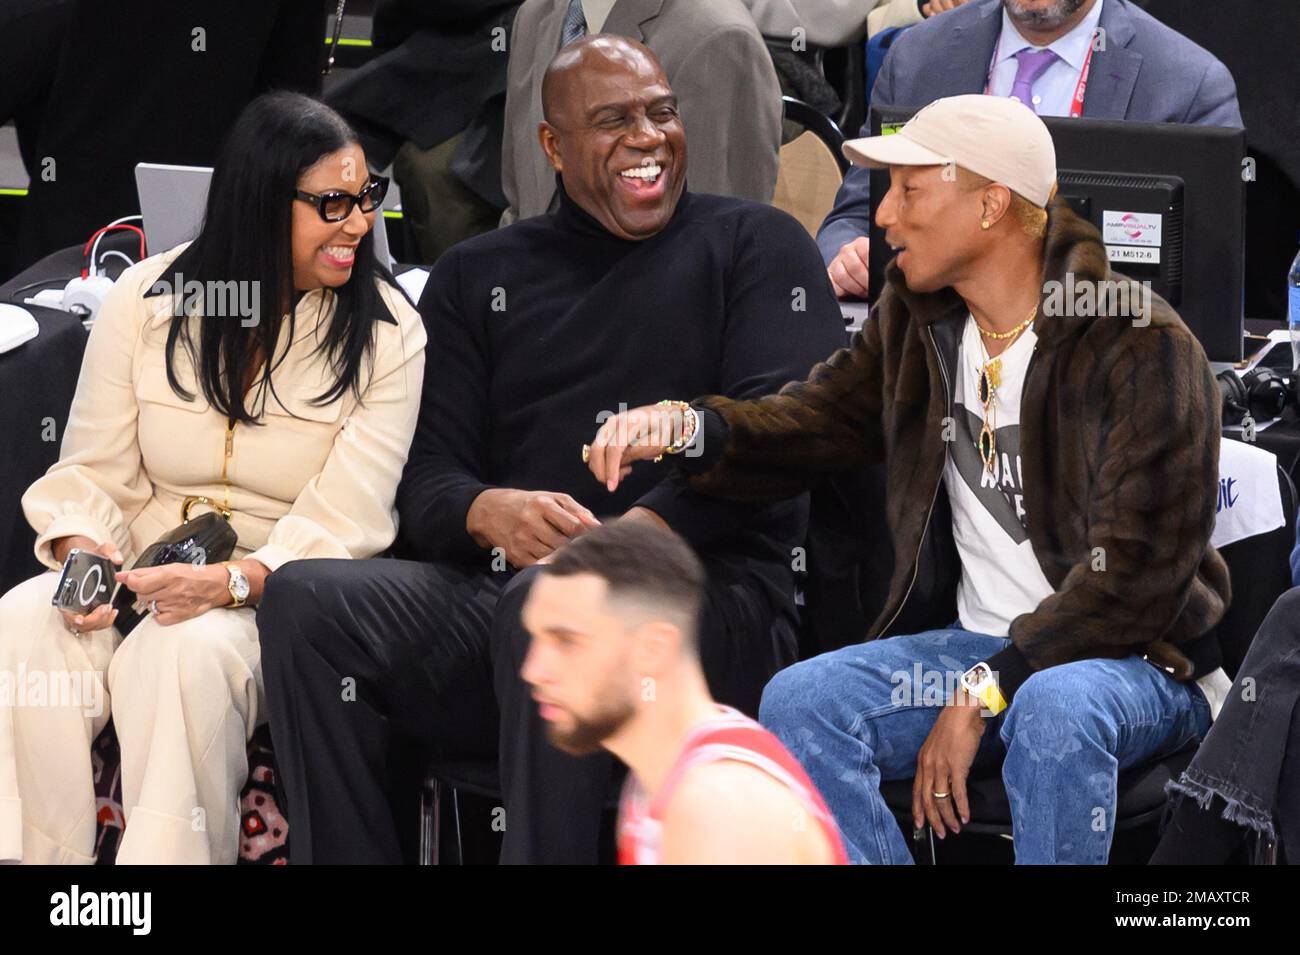 Pharrell Williams and his wife Helen Lasichanh attend the NBA Paris Game  2023 match between Detroit Pistons and Chicago Bulls at AccorHotels Arena  on January 19, 2023 in Paris, France. Photo by